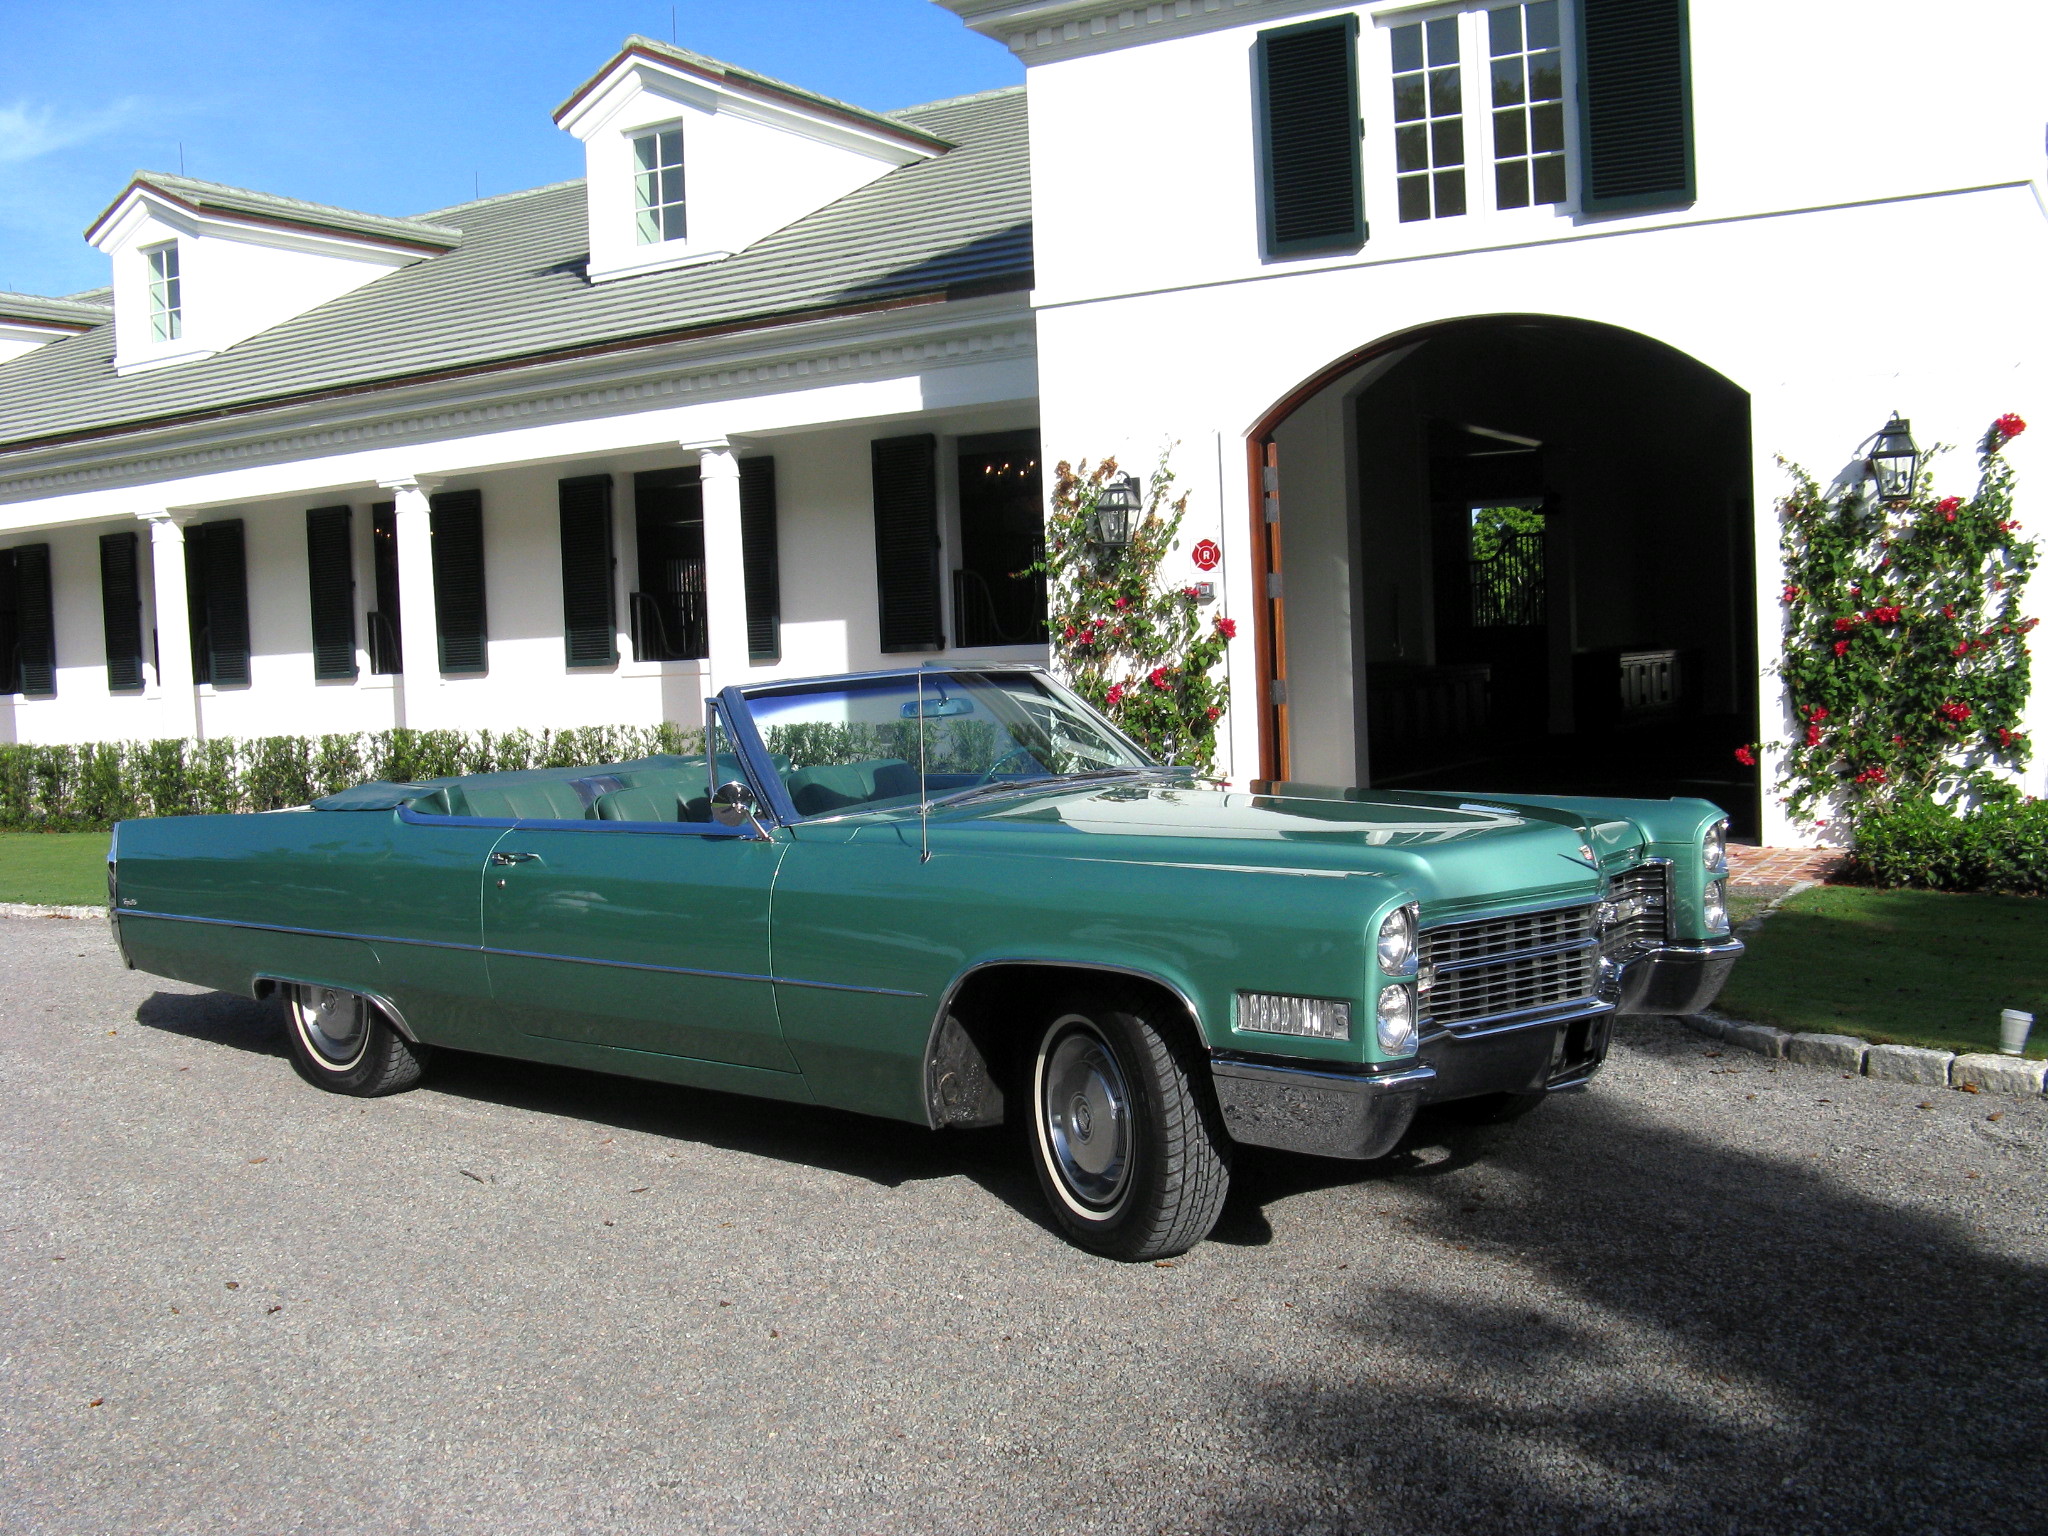 4th Image of a 1966 CADILLAC DEVILLE